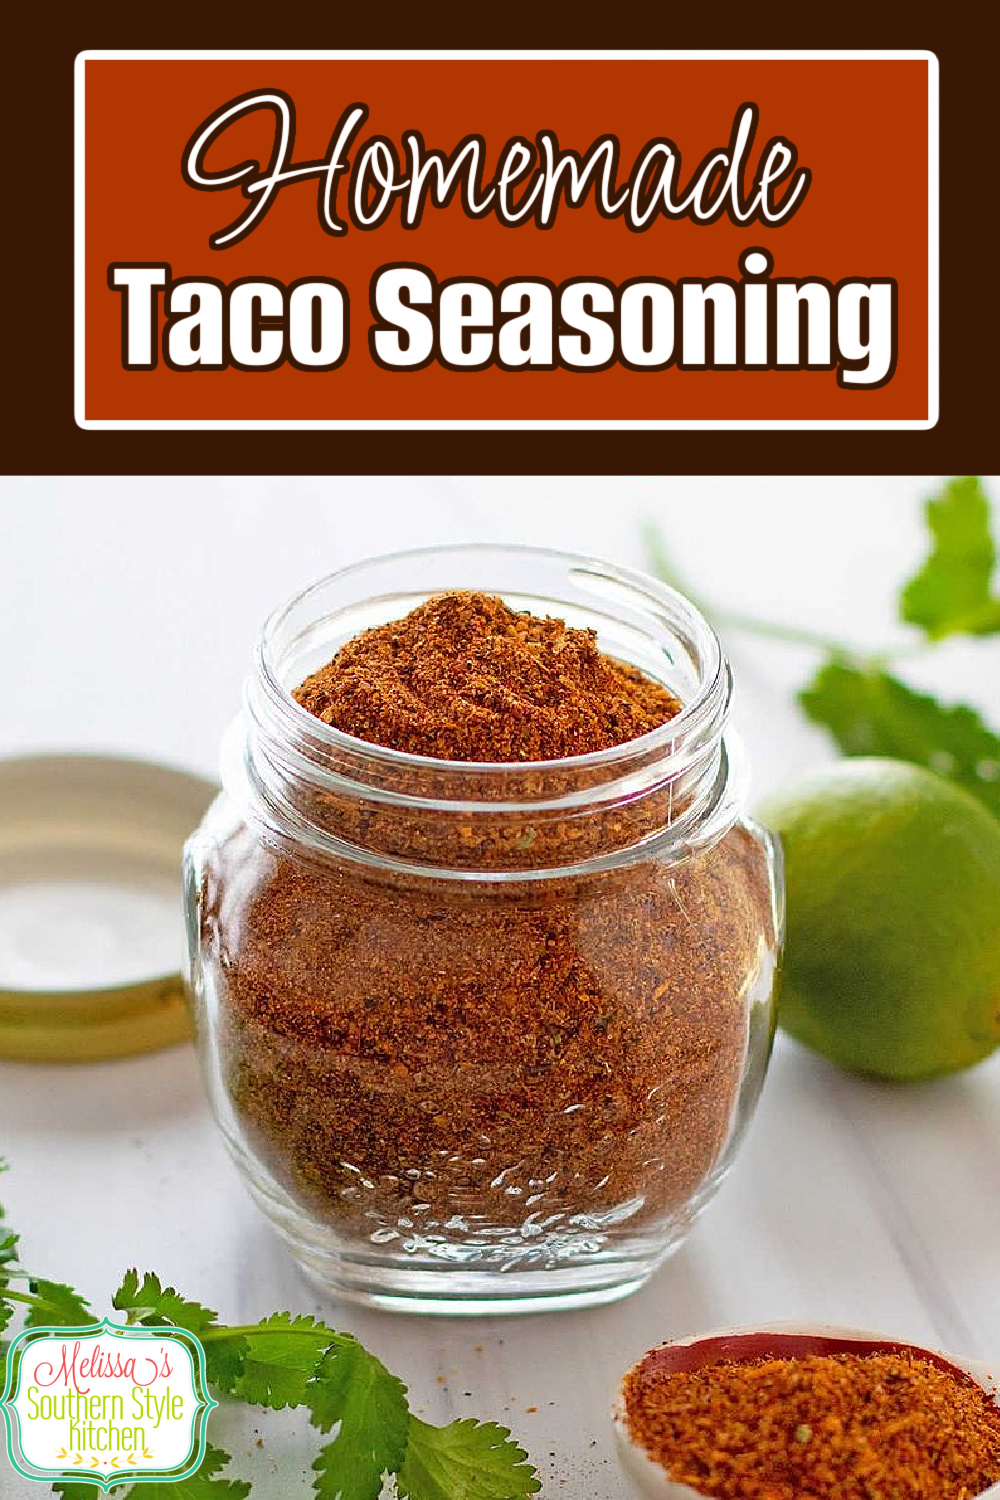 Make your own Homemade Taco Seasoning in a snap and you'll be ready for a homestyle fiesta any night of the week #tacoseasoning #tacos #tacotuesday #homemadetacoseasoning #southernrecipes #homemadetacoseasonings